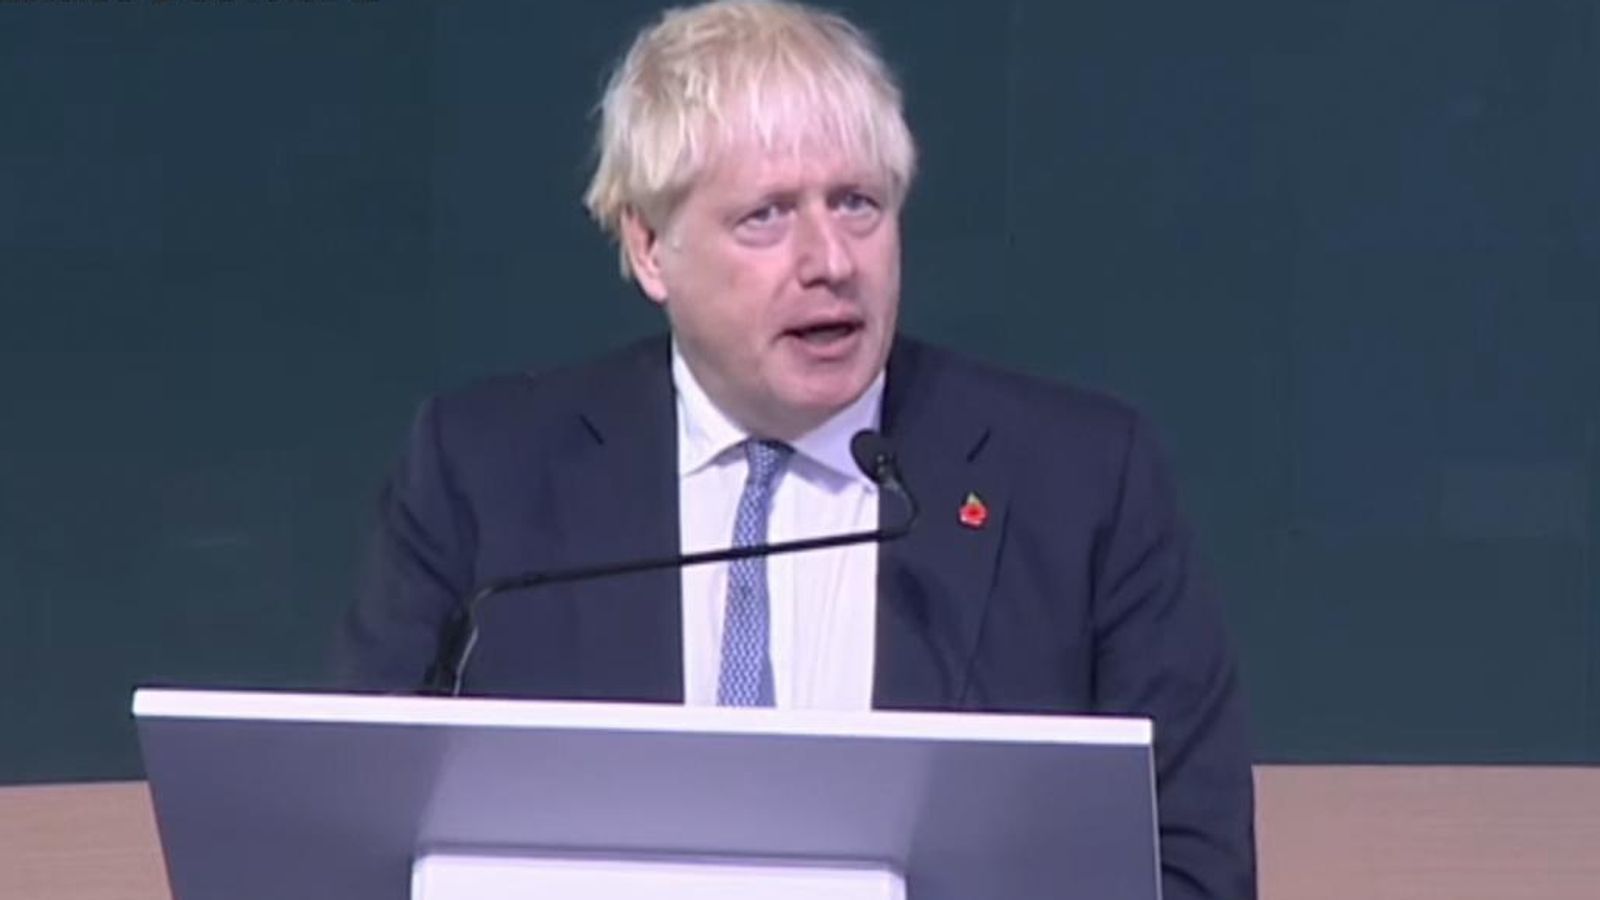 Boris Johnson at COP27 in 'purely supportive role'